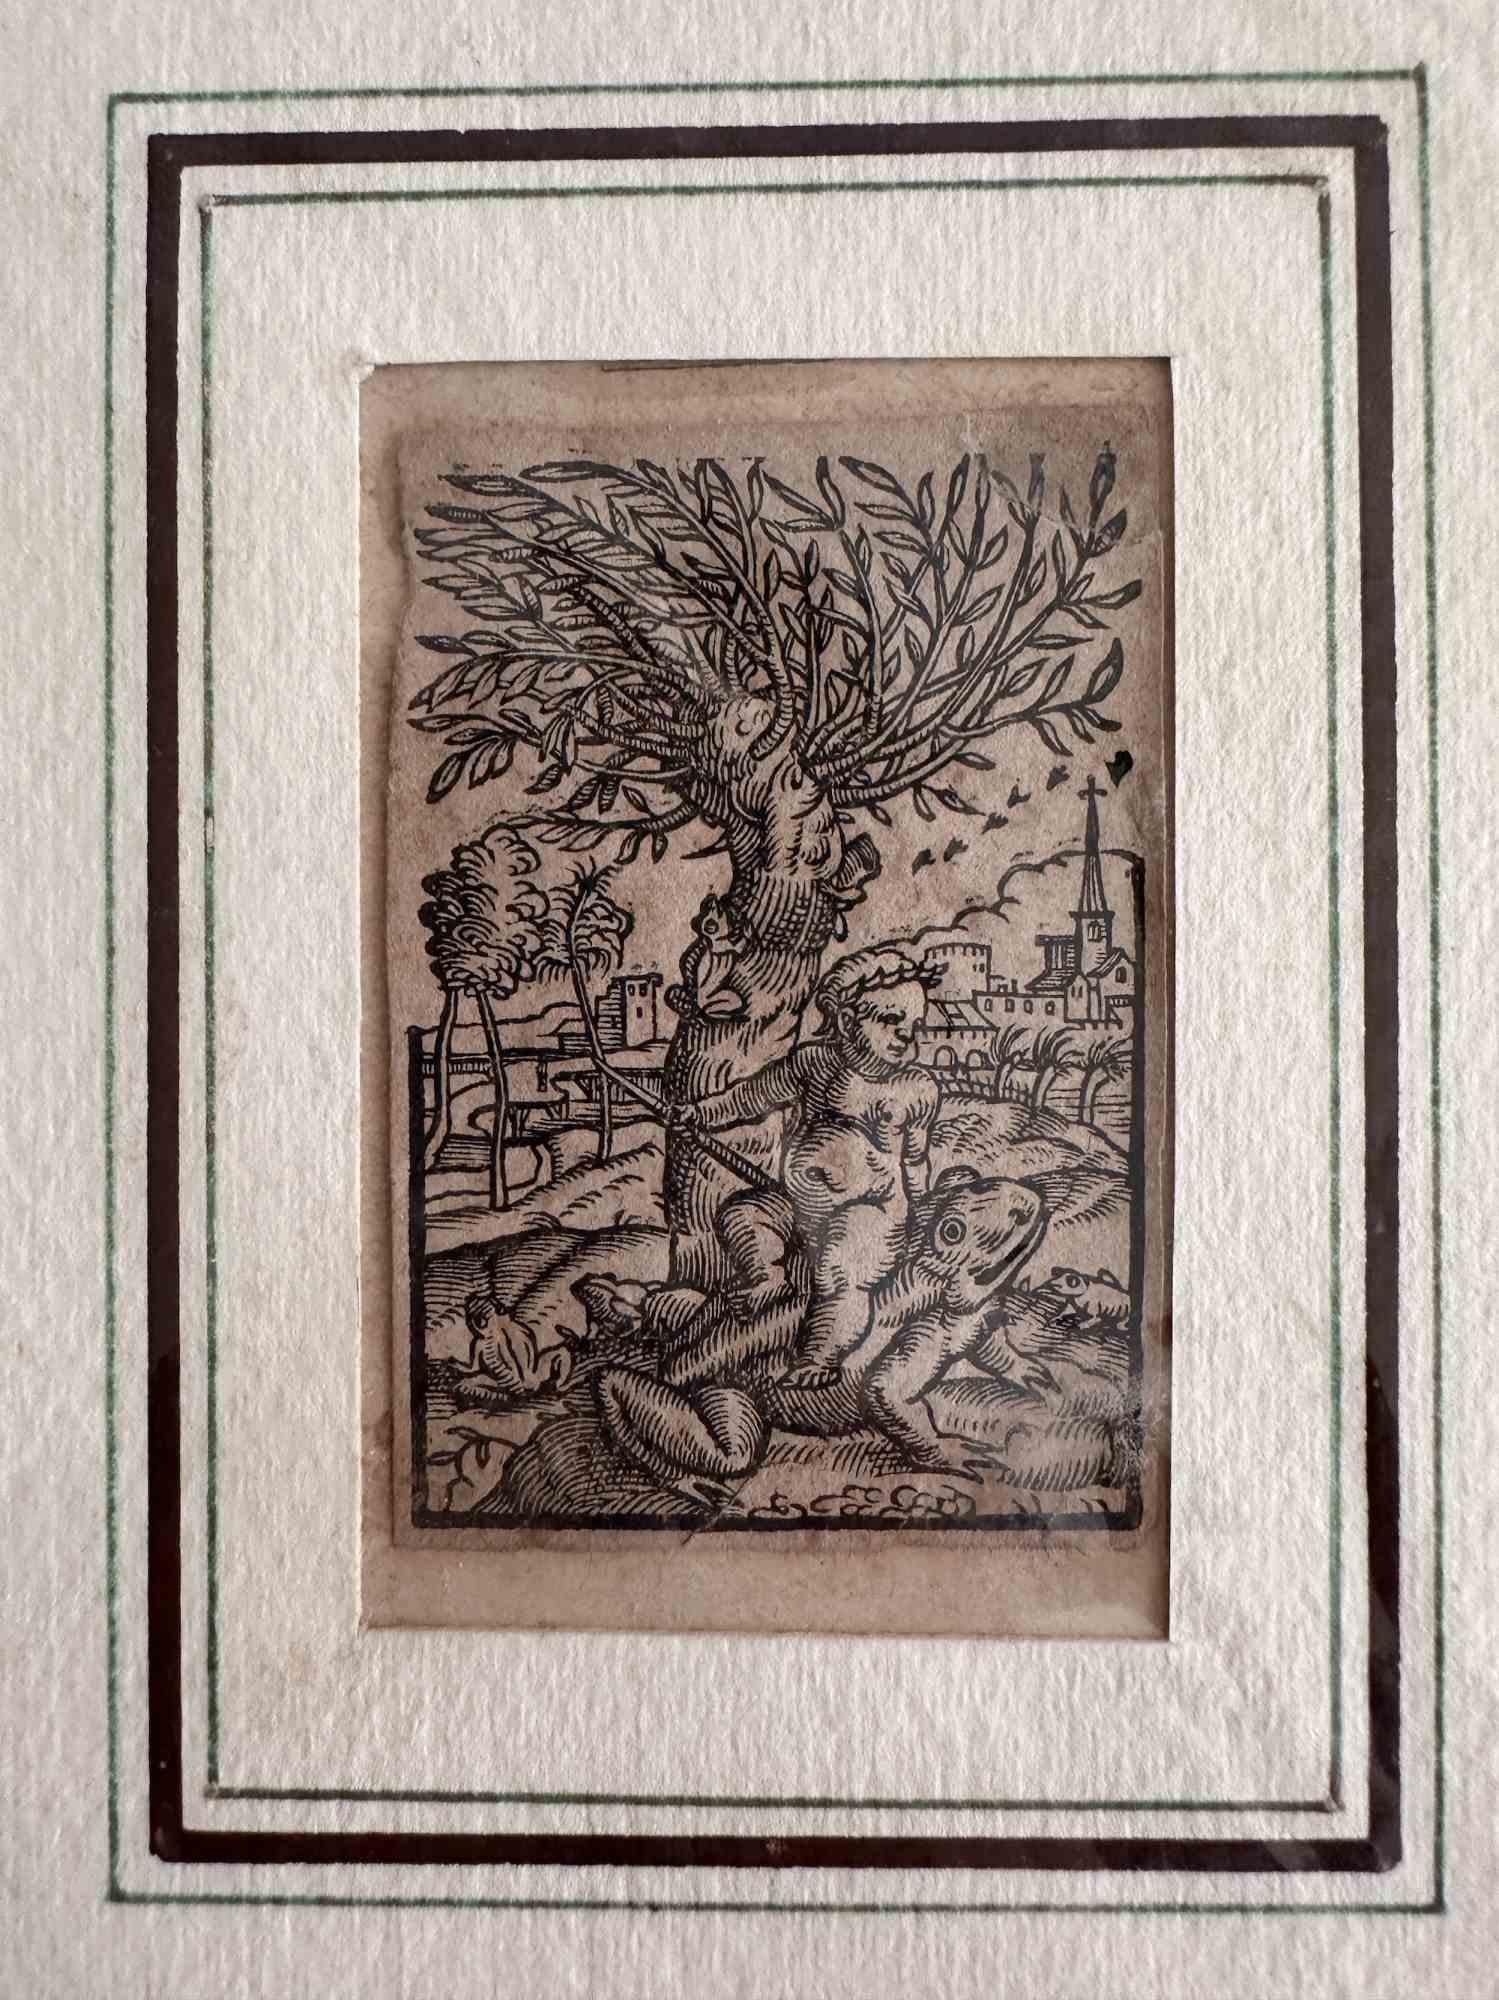 Unknown Figurative Print - Boy Mounted on a Frog - Woodcut Print - 1830s